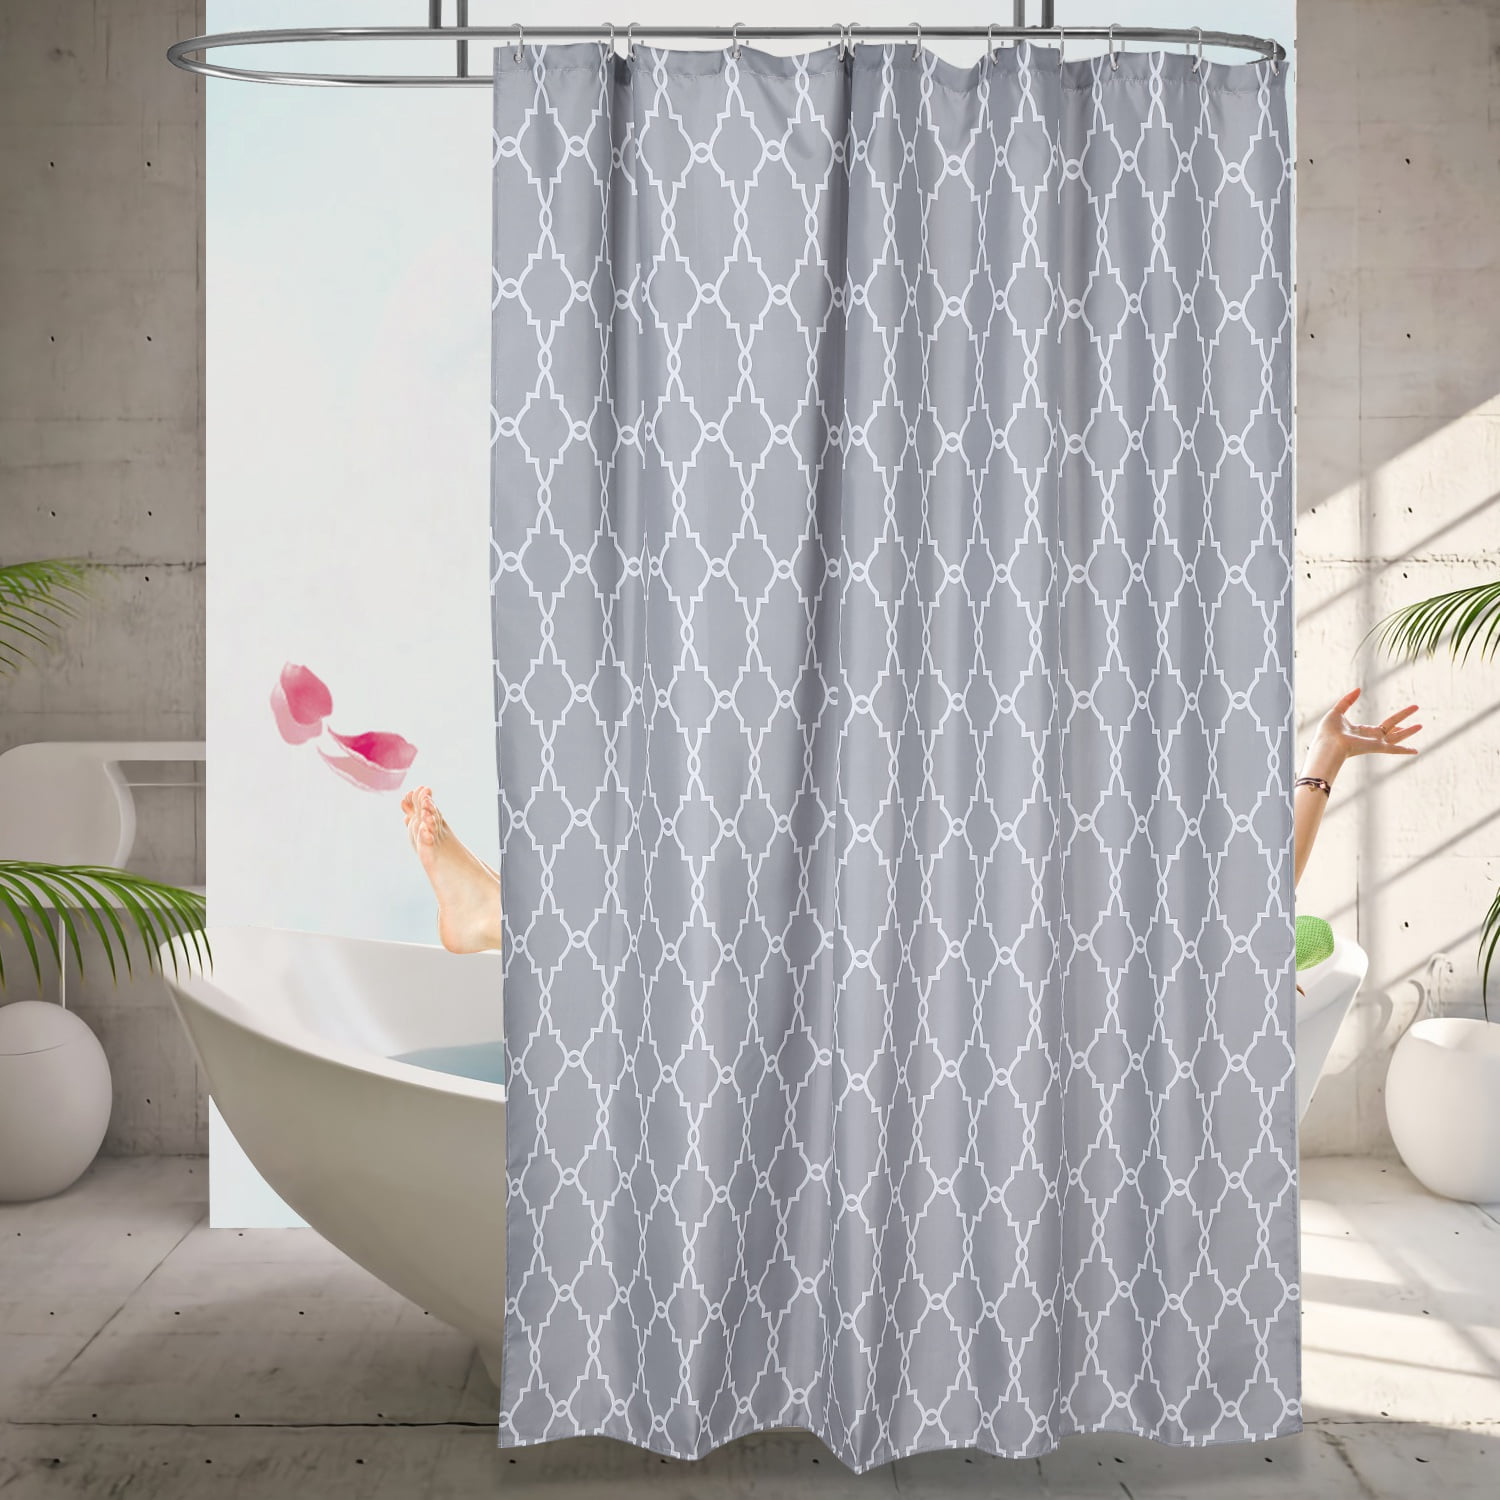 Cloudy Gray Waterproof Bathroom Polyester Shower Curtain Liner Water Resistant 